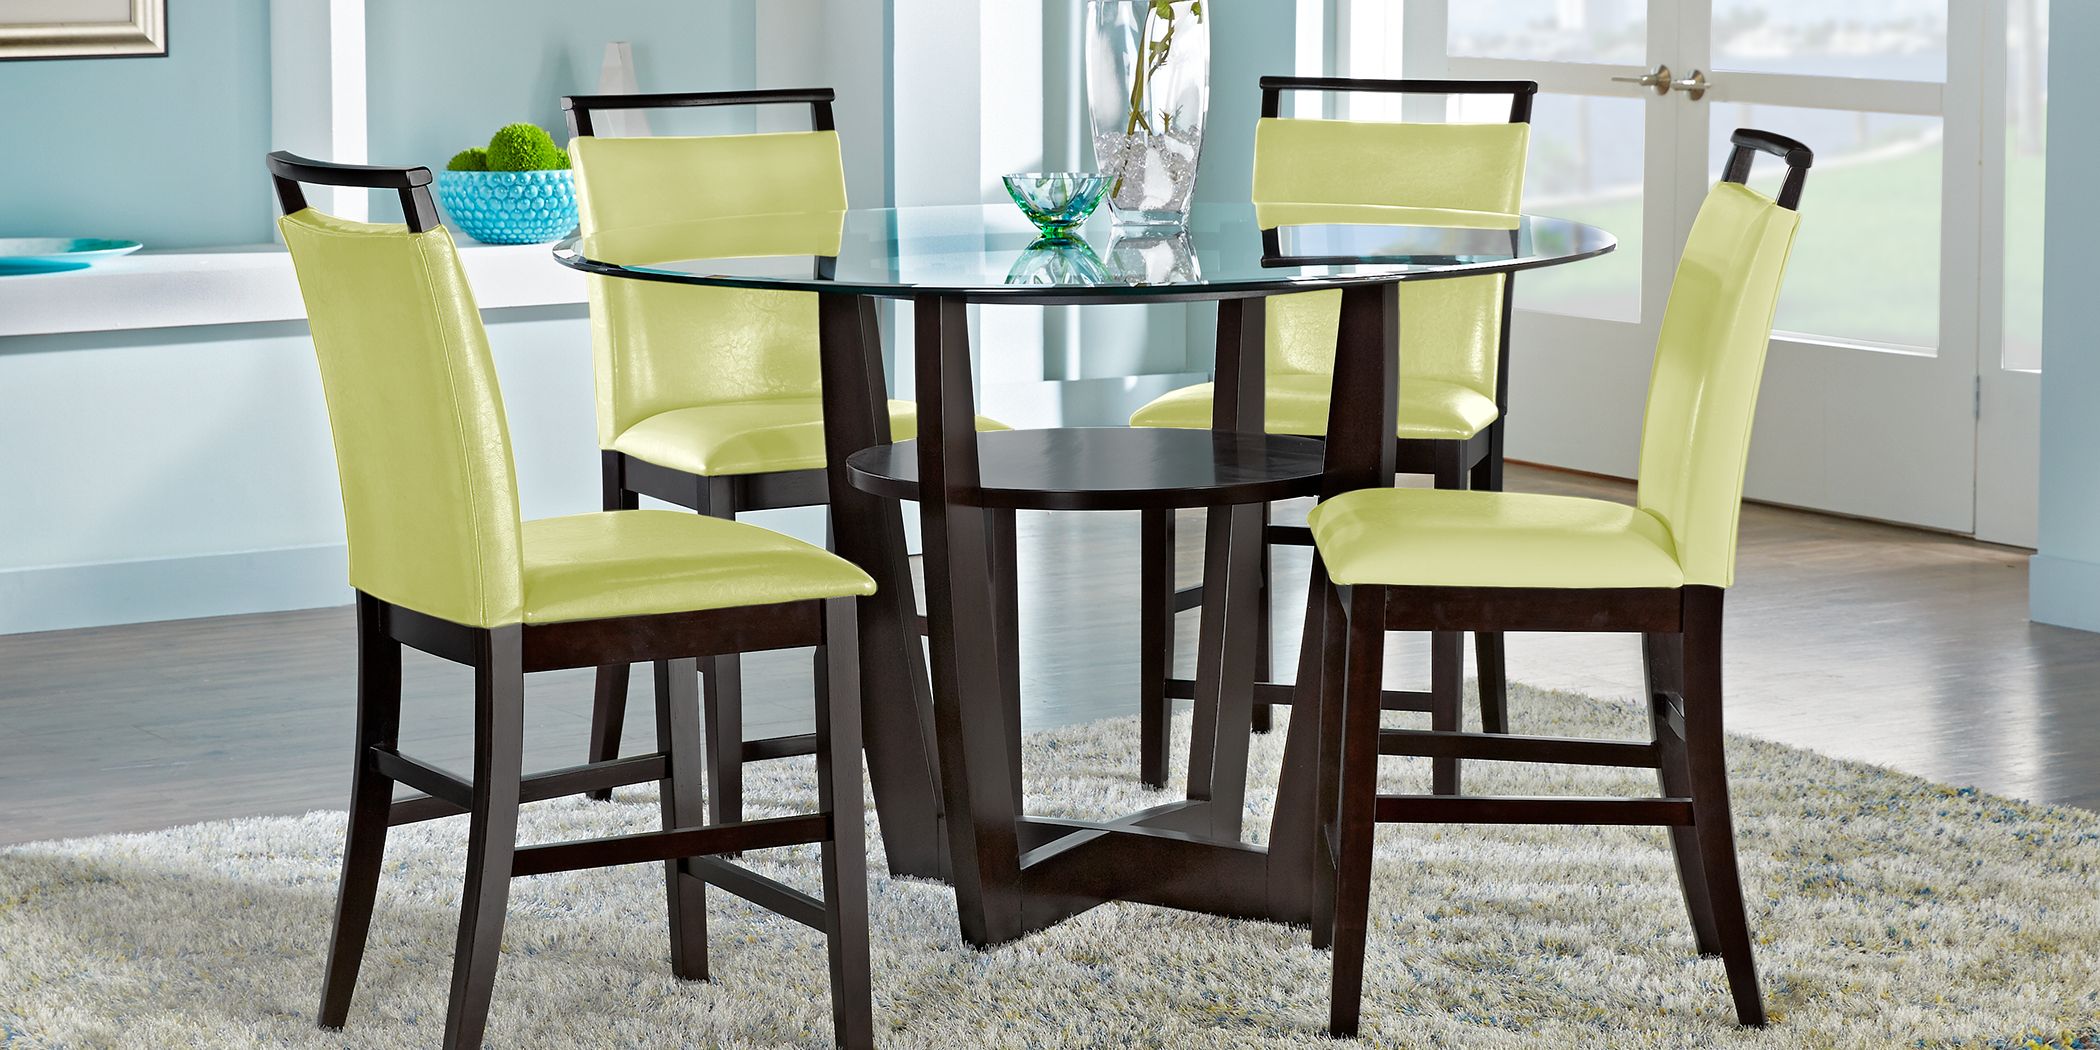 Glass Dining Table Sets, Tall Round Dining Room Tables